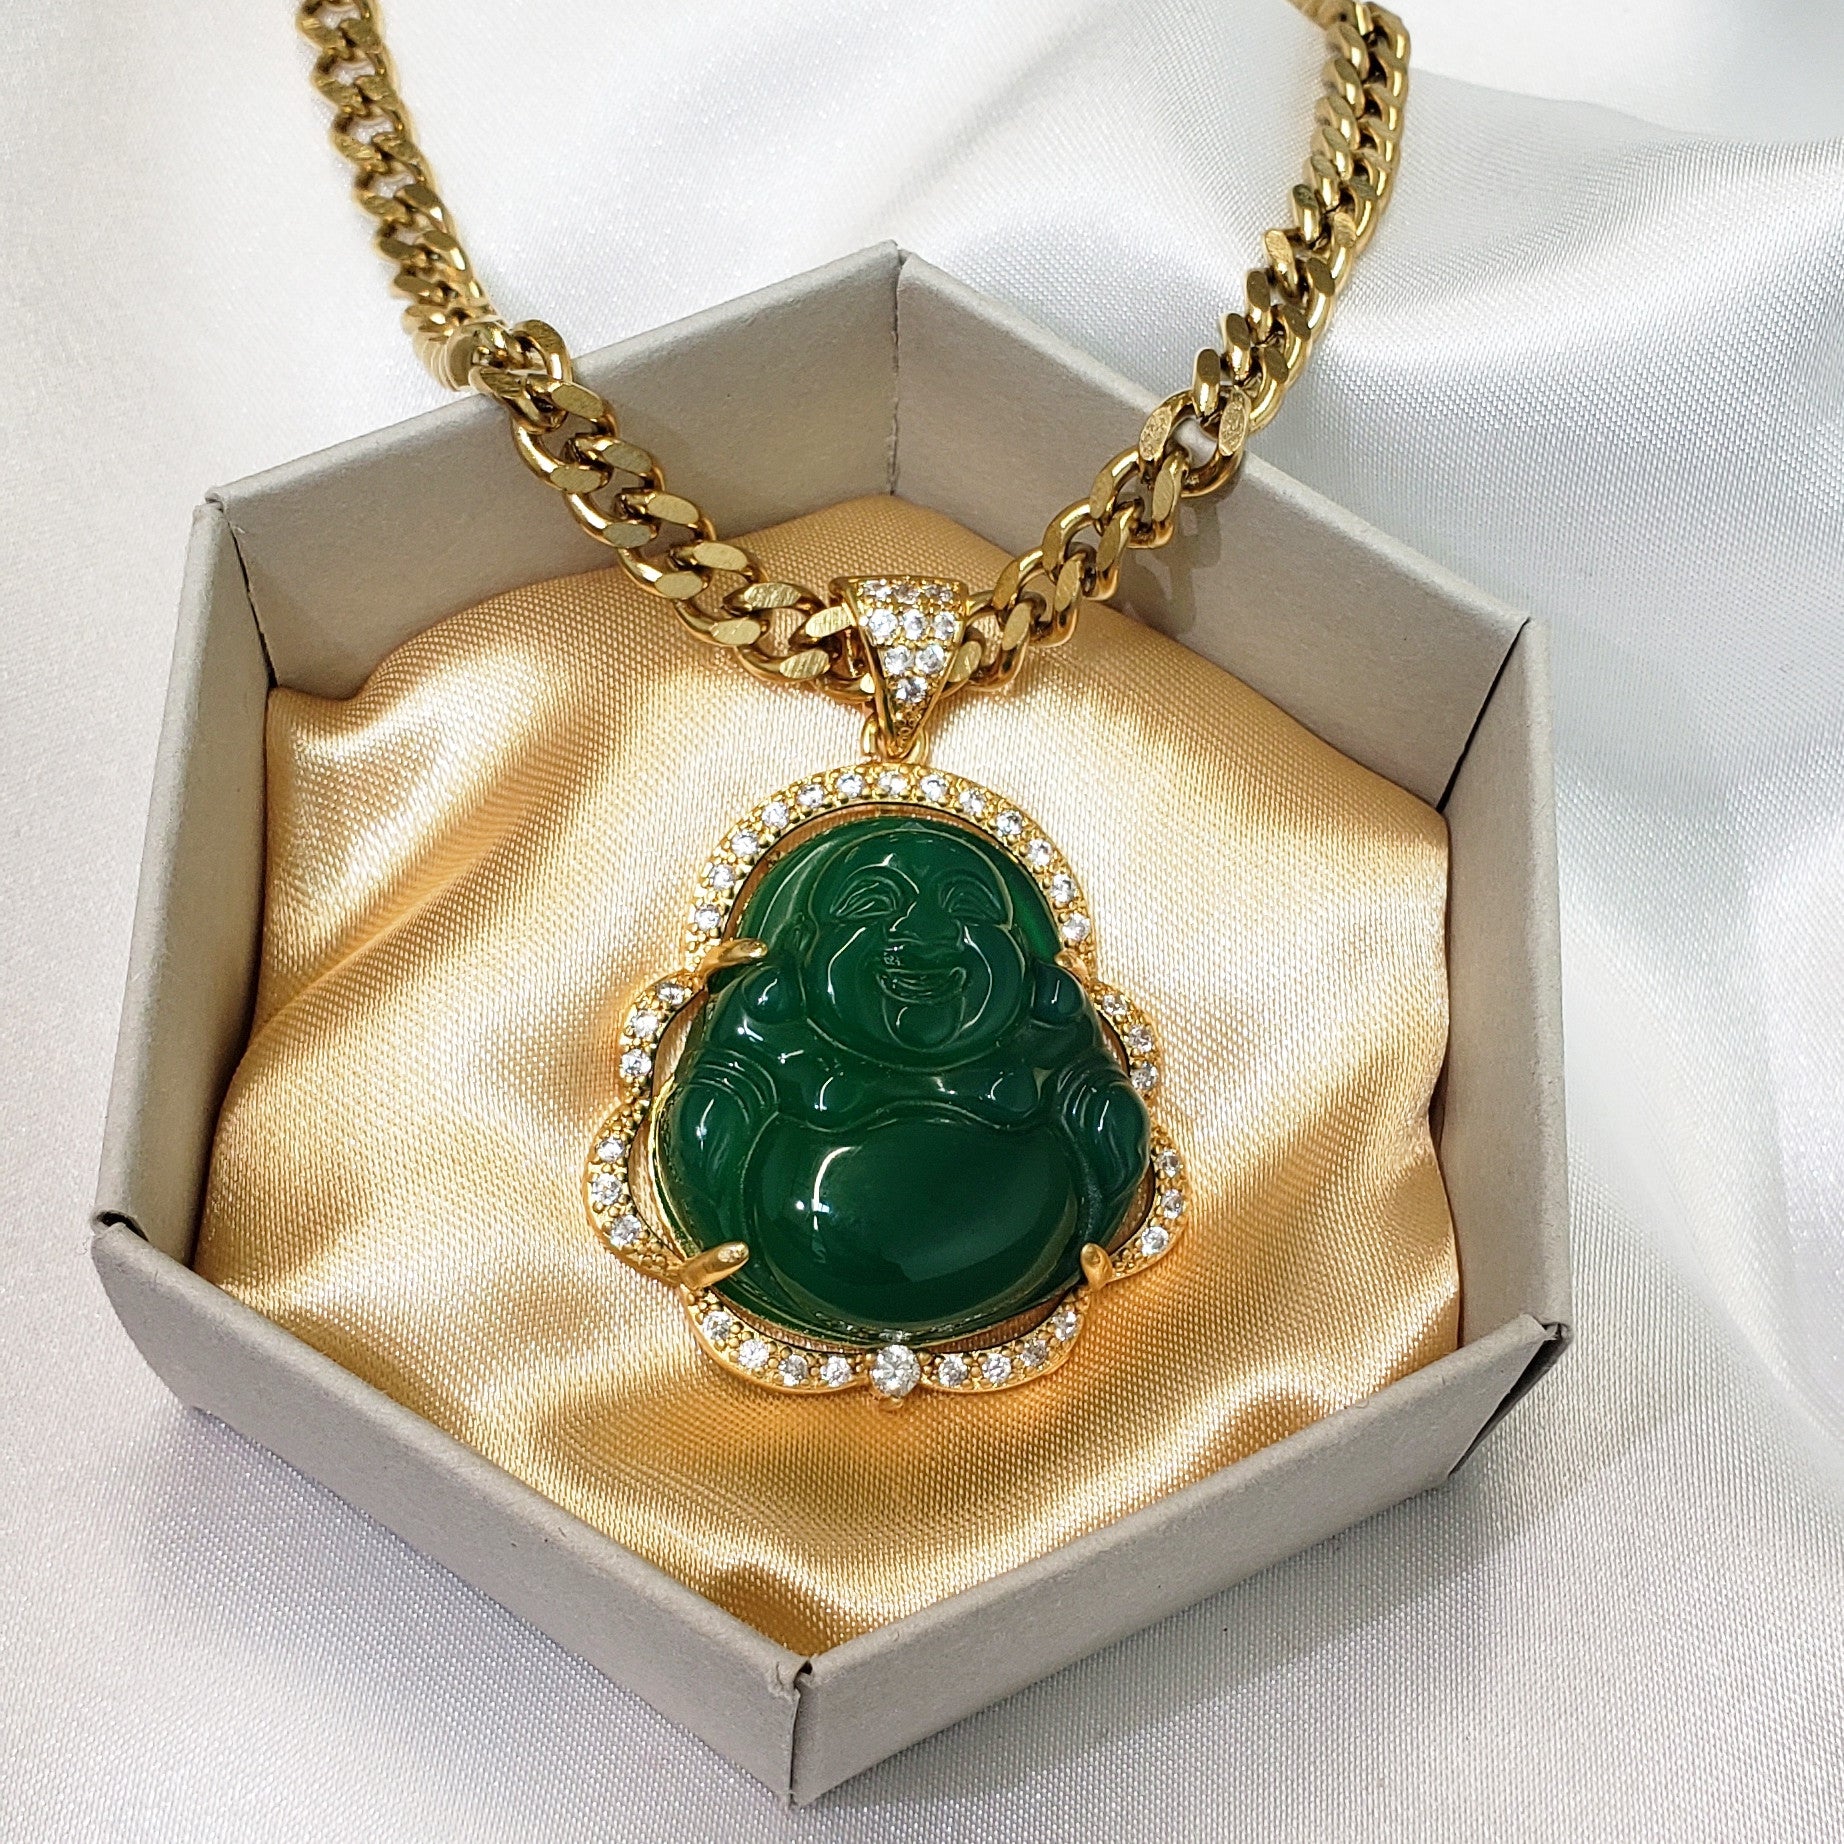 14K Gold Plated Green Jade Buddha Pendant Necklace With Lab Simulated  Diamonds | eBay